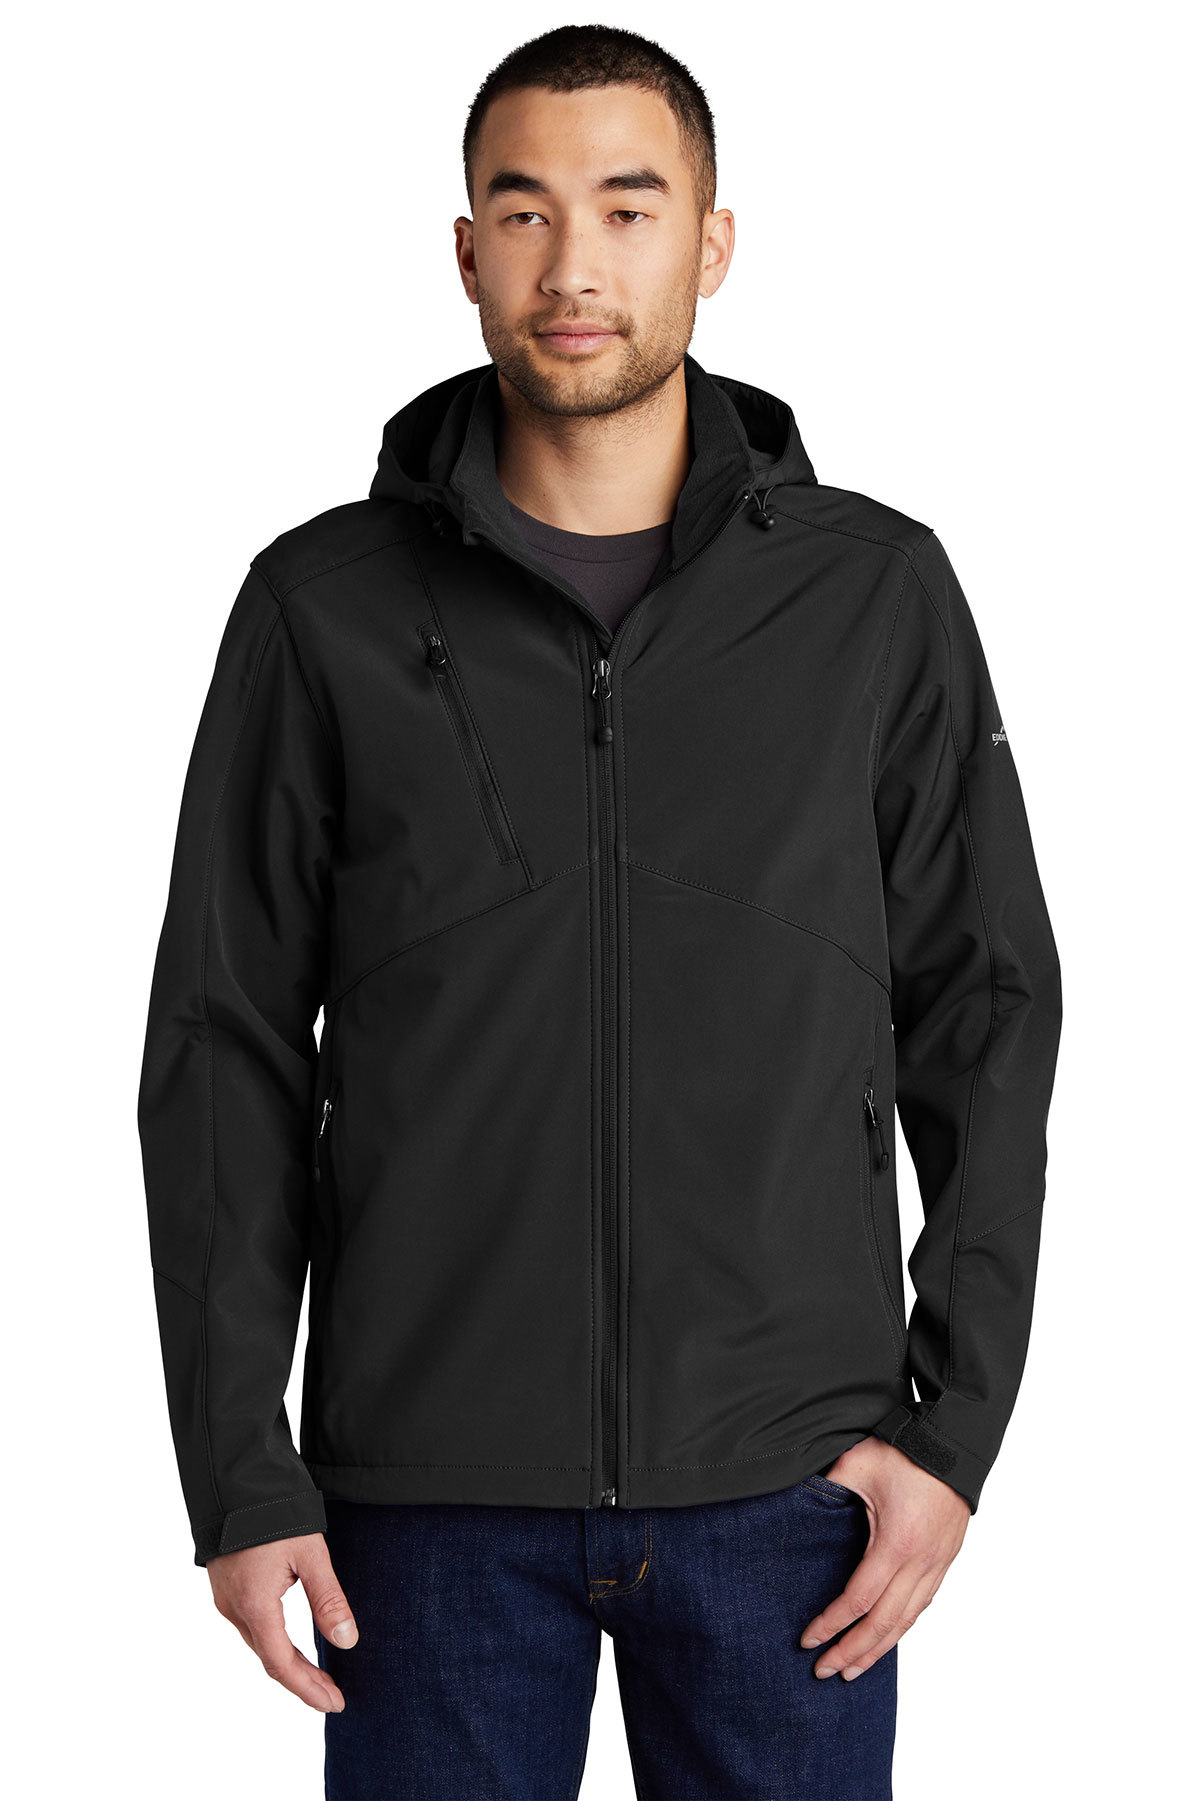 Bauer Hooded Soft Shell | Product |